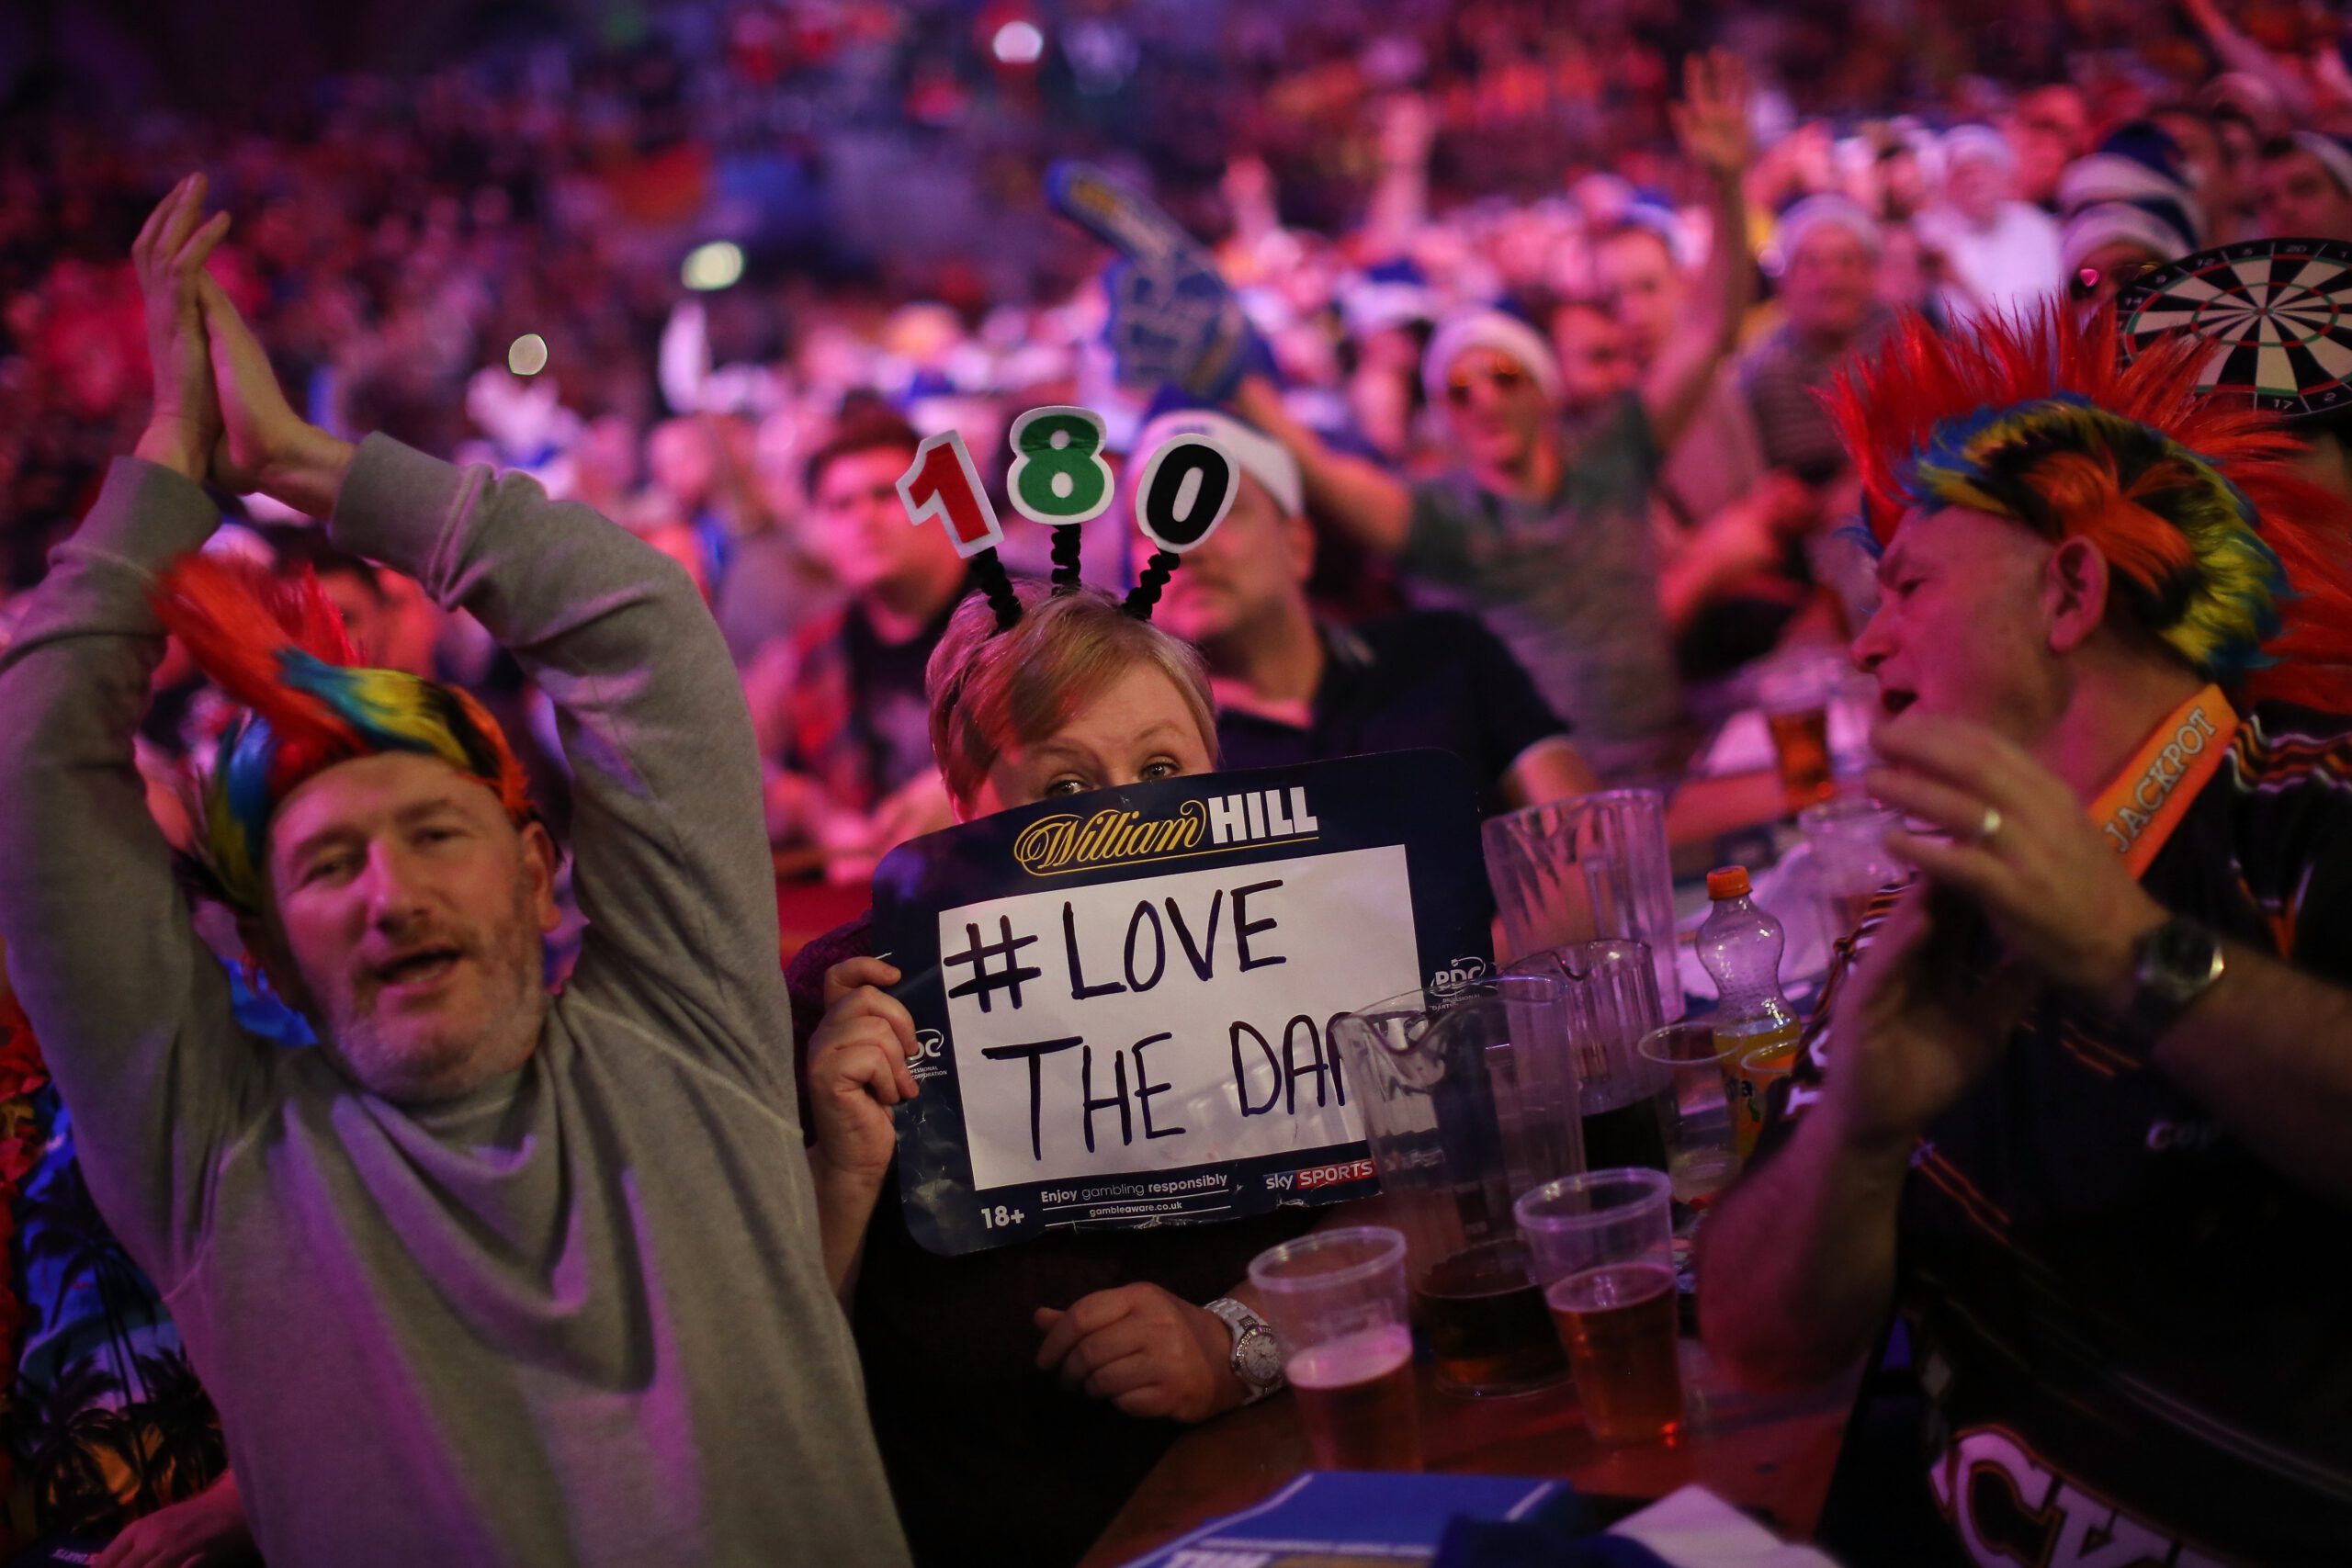 Darts fans watch the action